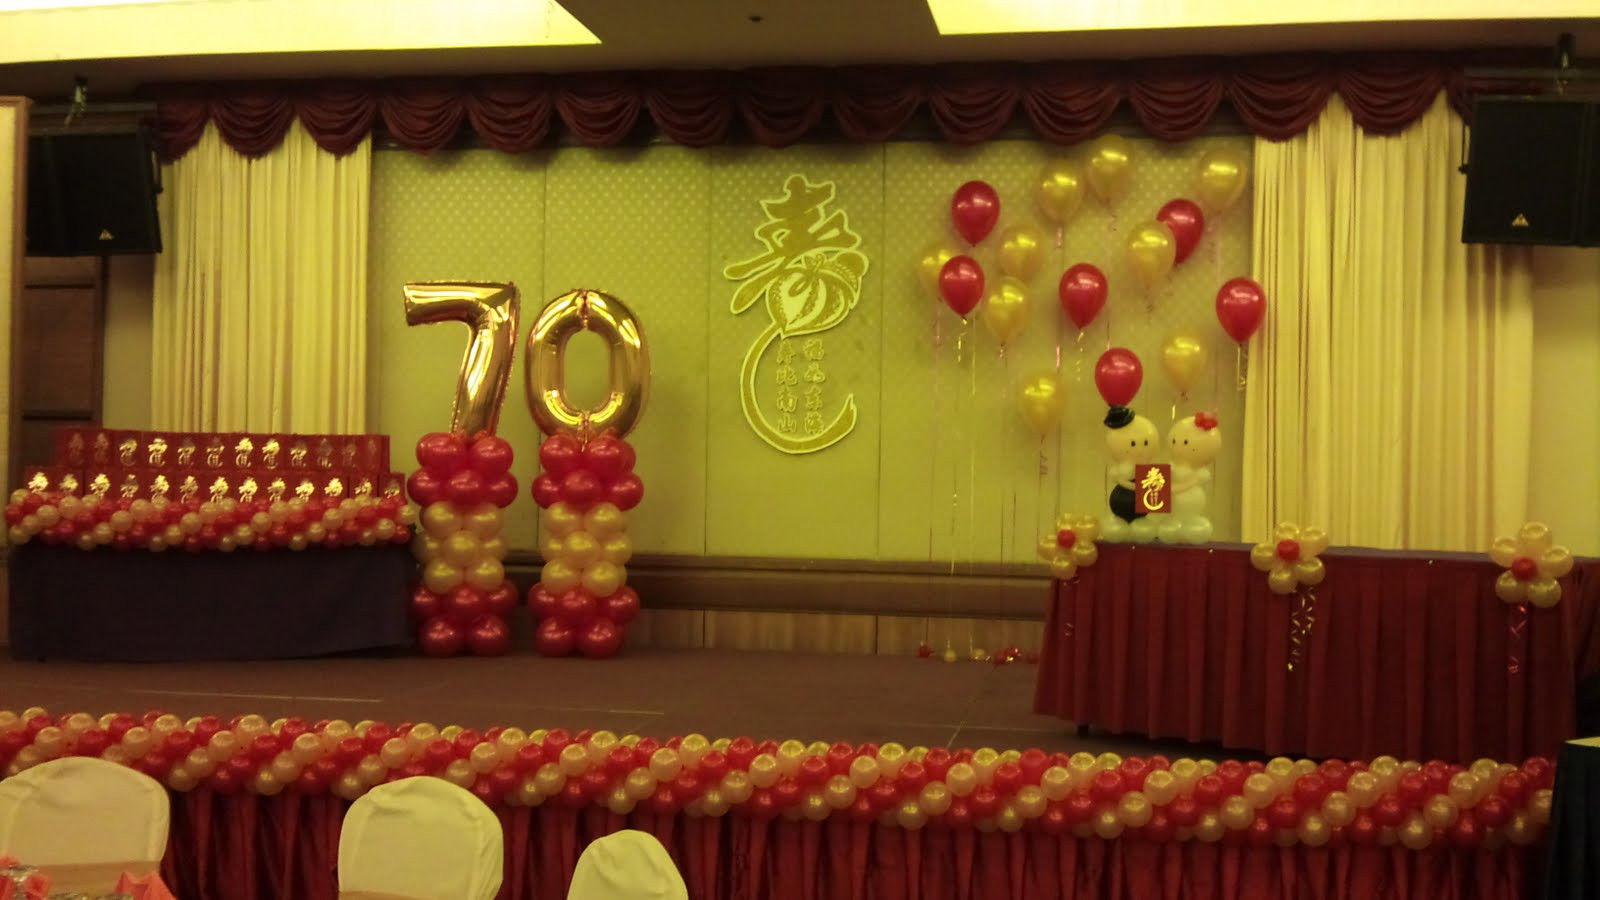 70th Birthday Party Decorations
 Balloon decorations for weddings birthday parties